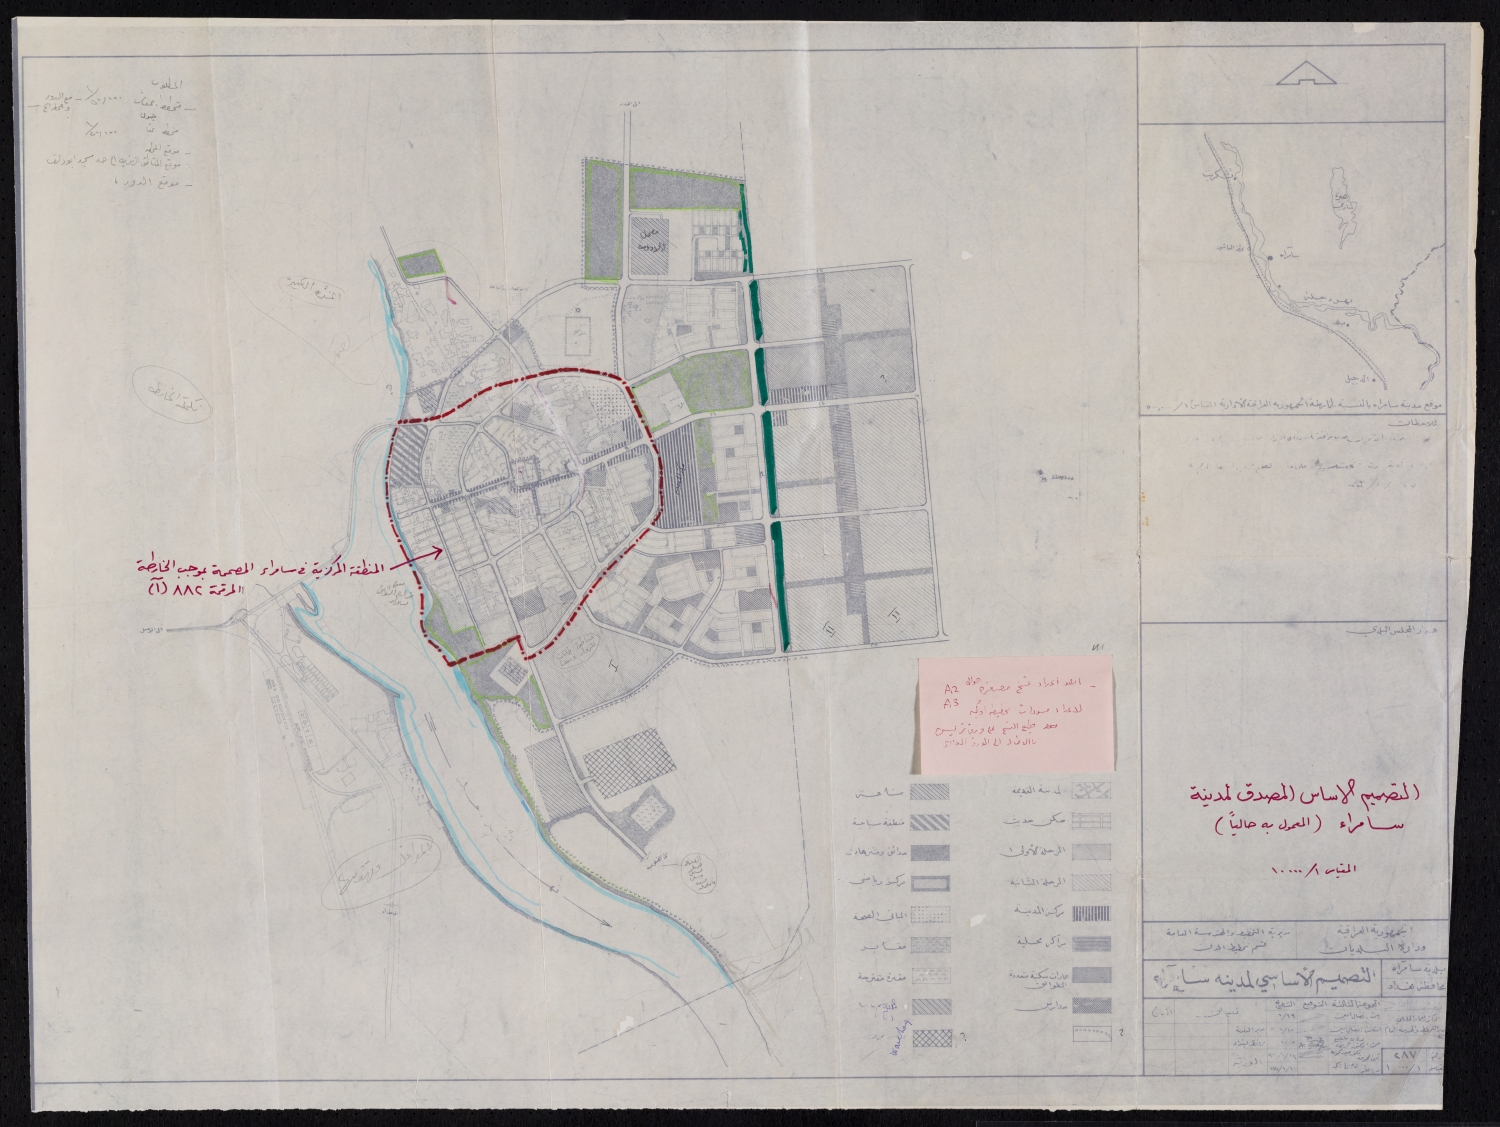 <p>Plan of Samarra, Iraq, land use map, annotated in Arabic</p>